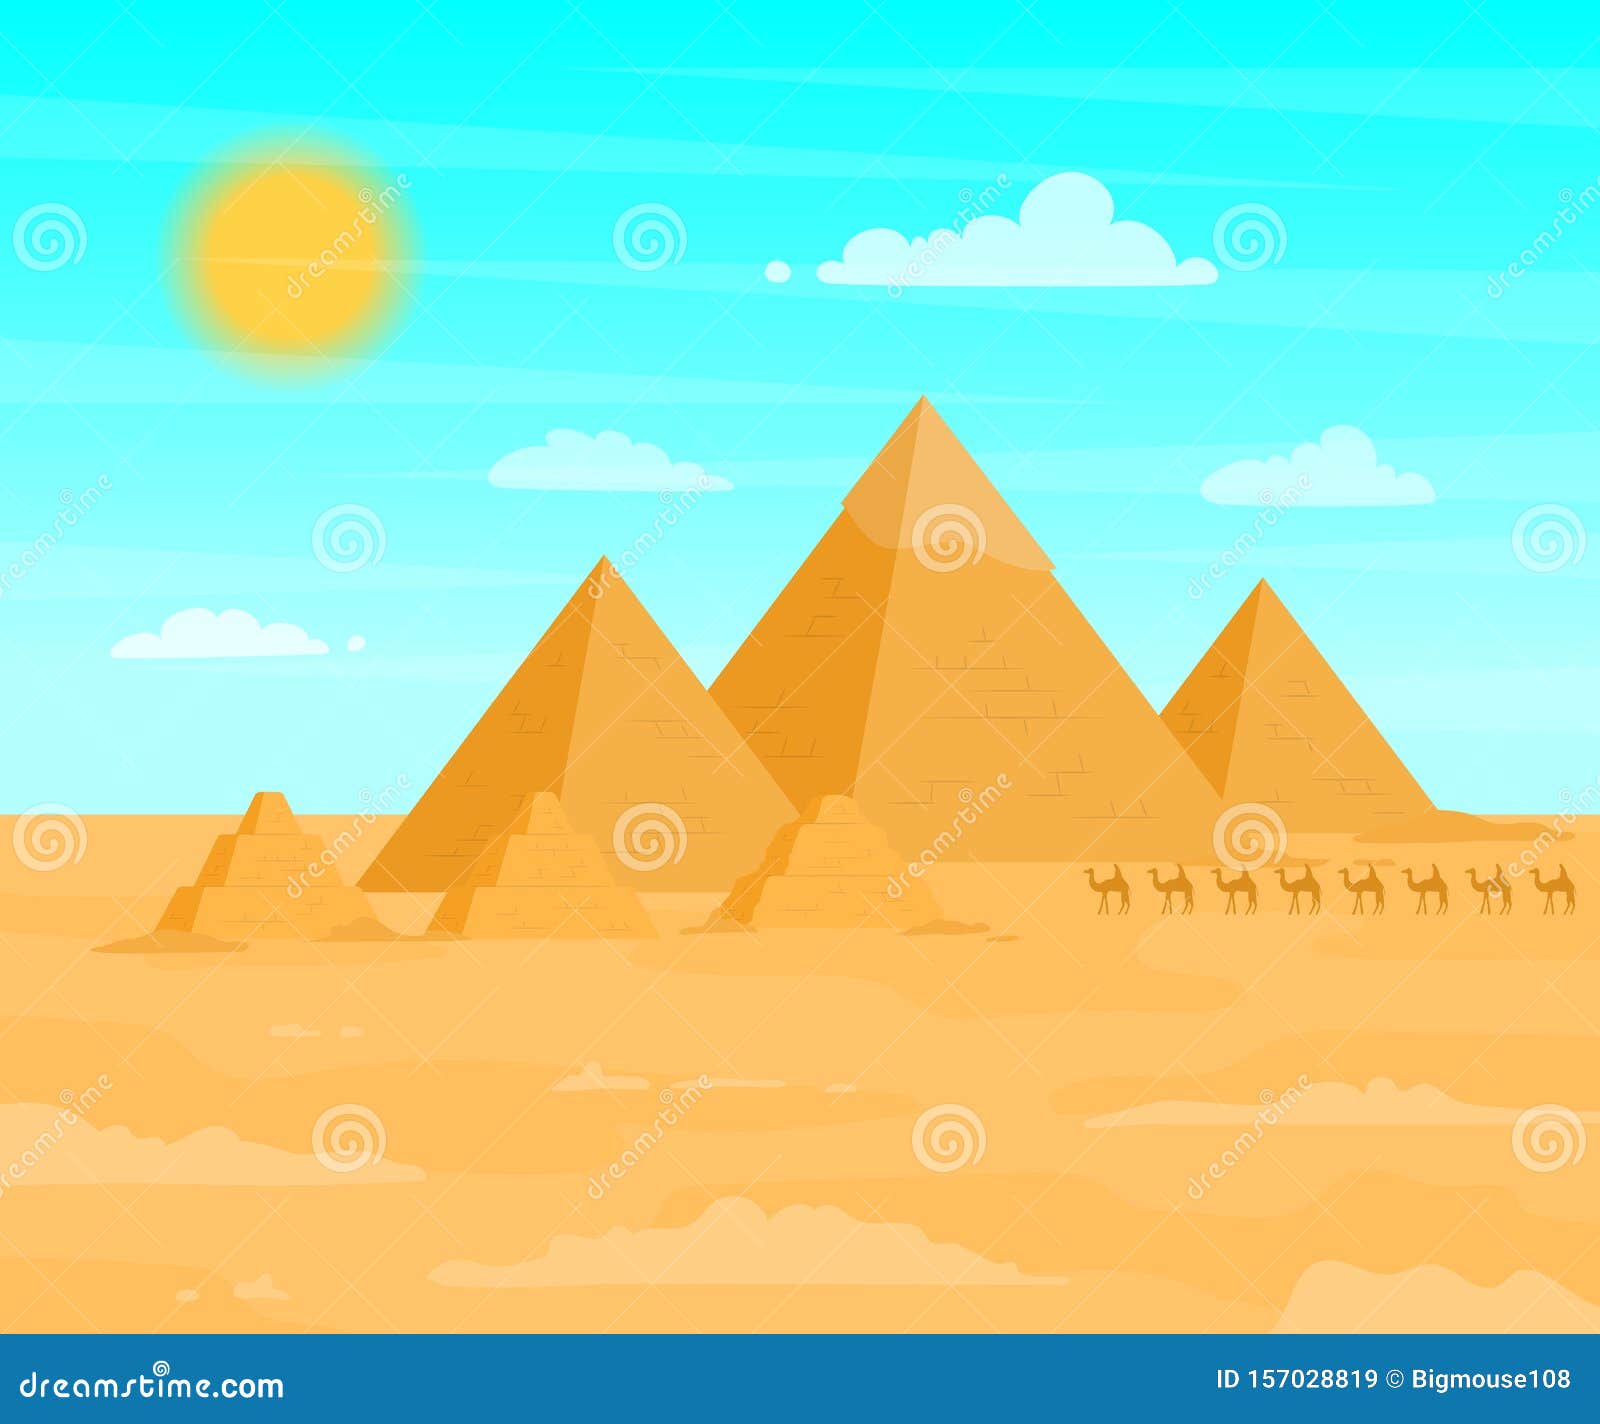 Egyptian Pyramids Travel and Tourism Concept on a Desert Landscape ...